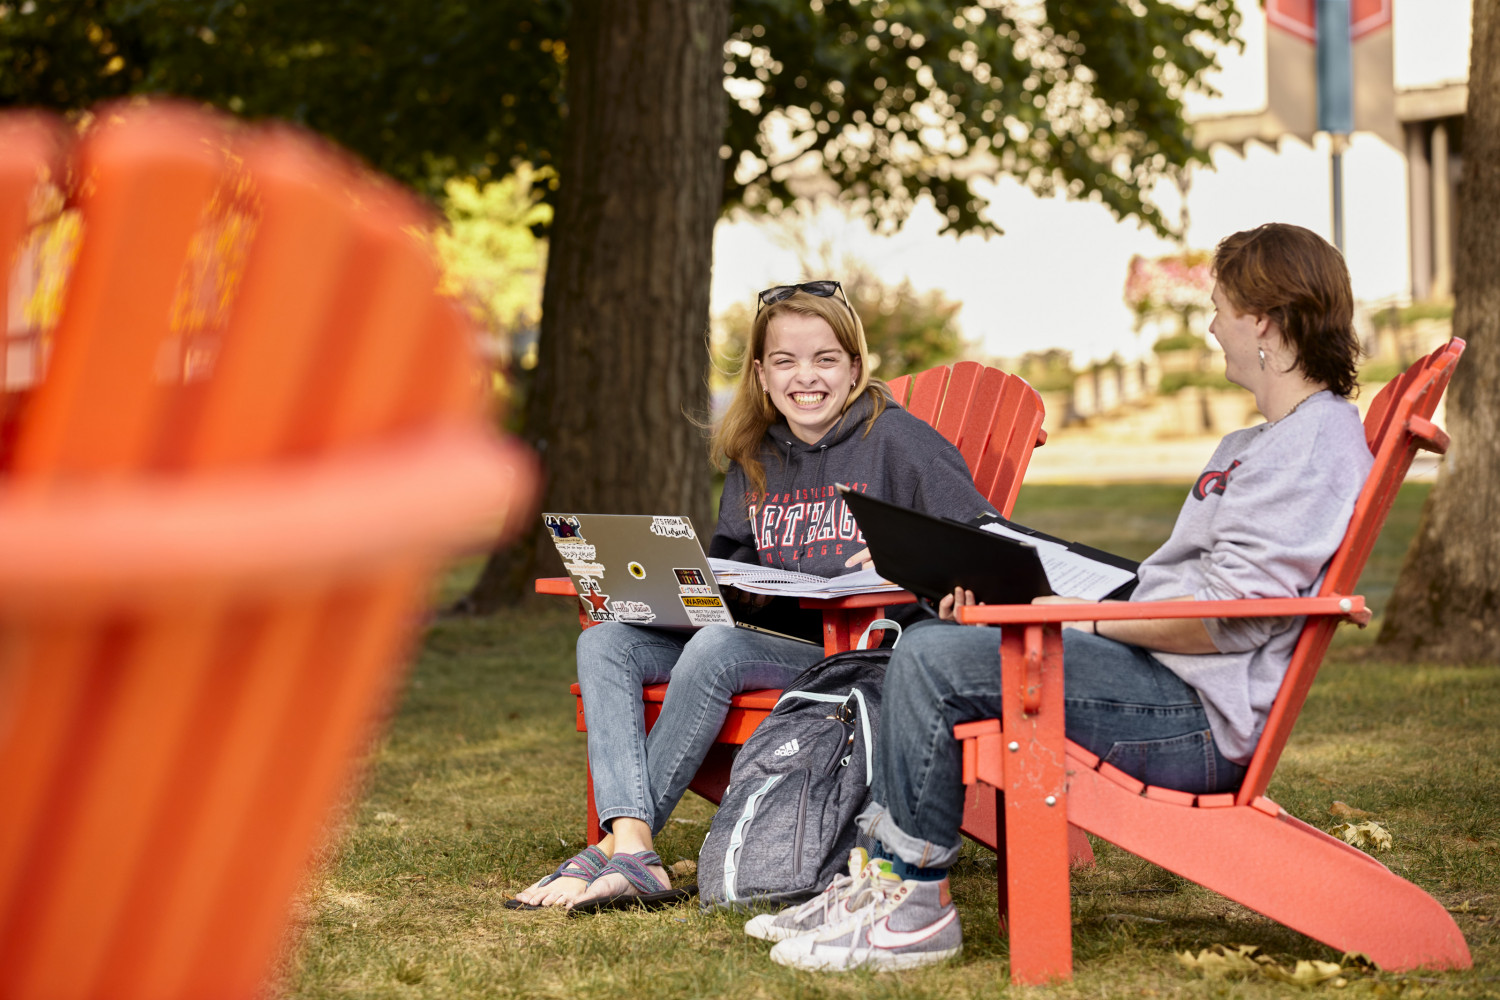 Students hang out in the red Adirondack chairs between classes.